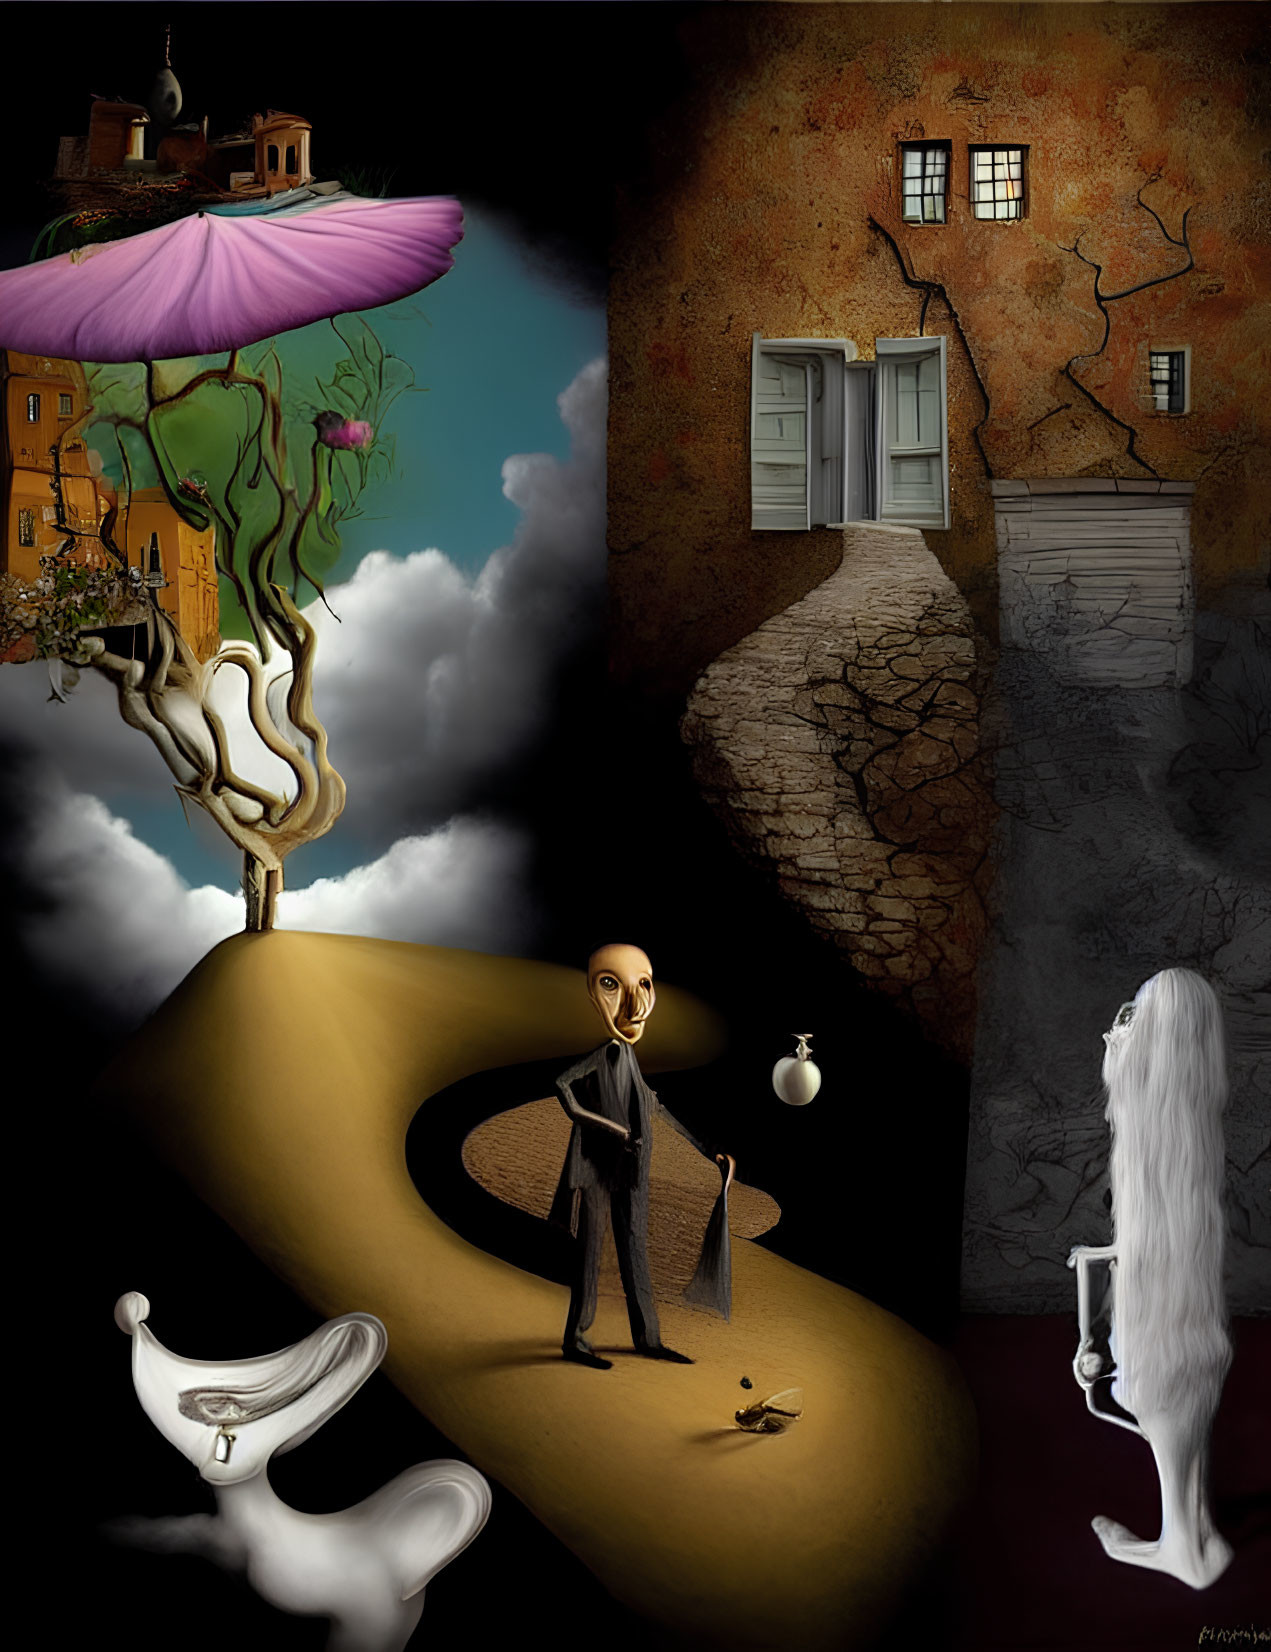 Surreal artwork: Alien figure, floating tree, cracked walls, ghostly figure, melting objects